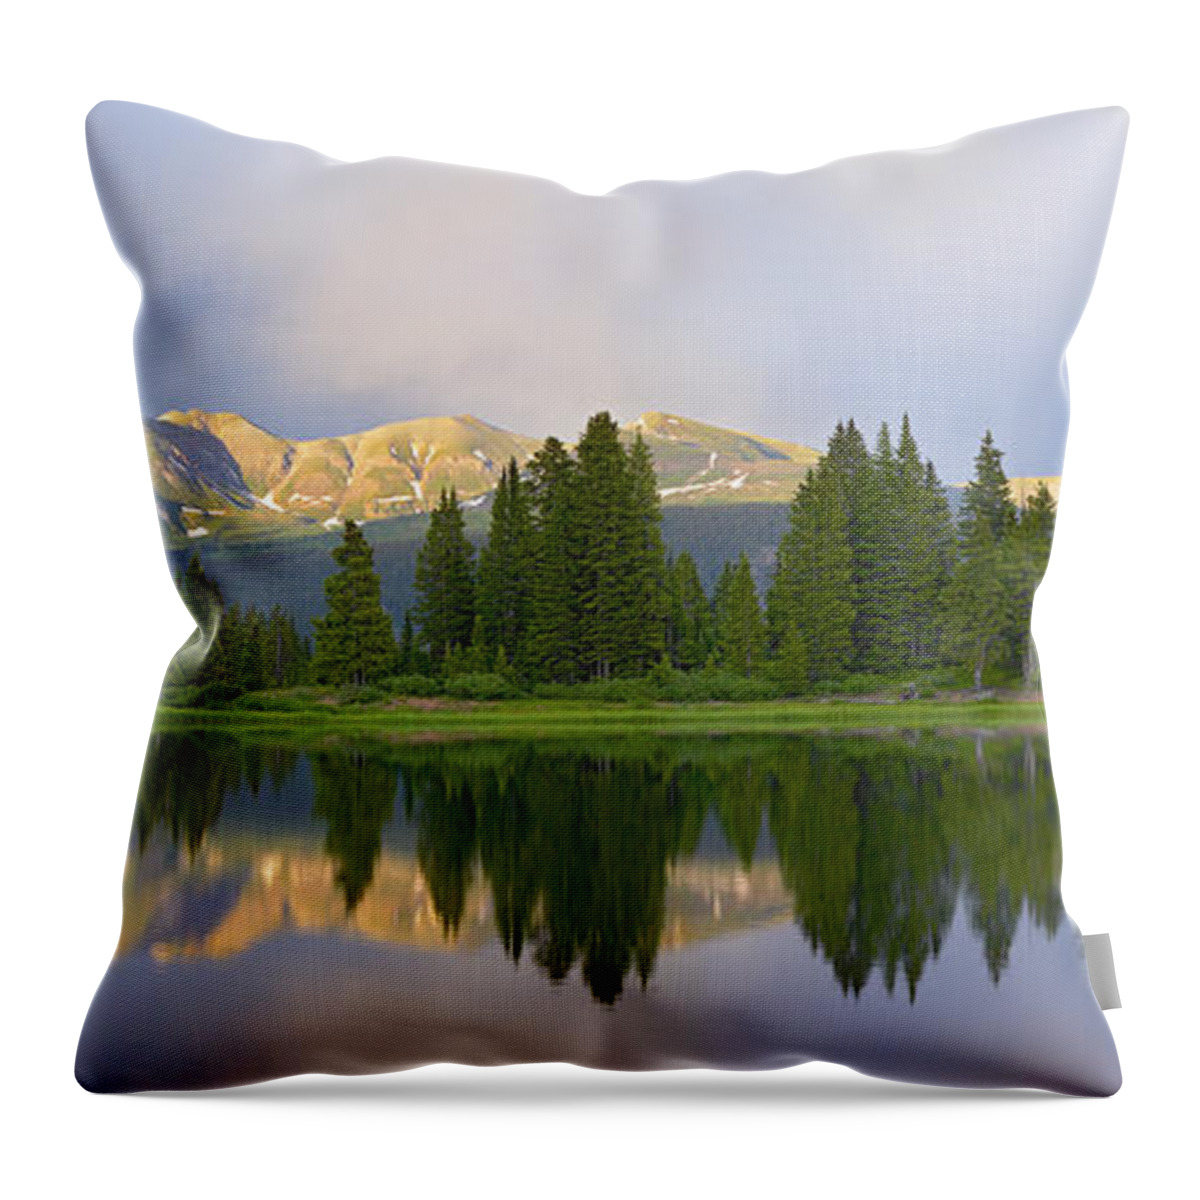 00175353 Throw Pillow featuring the photograph Panorama Of West Needle Mountains by Tim Fitzharris